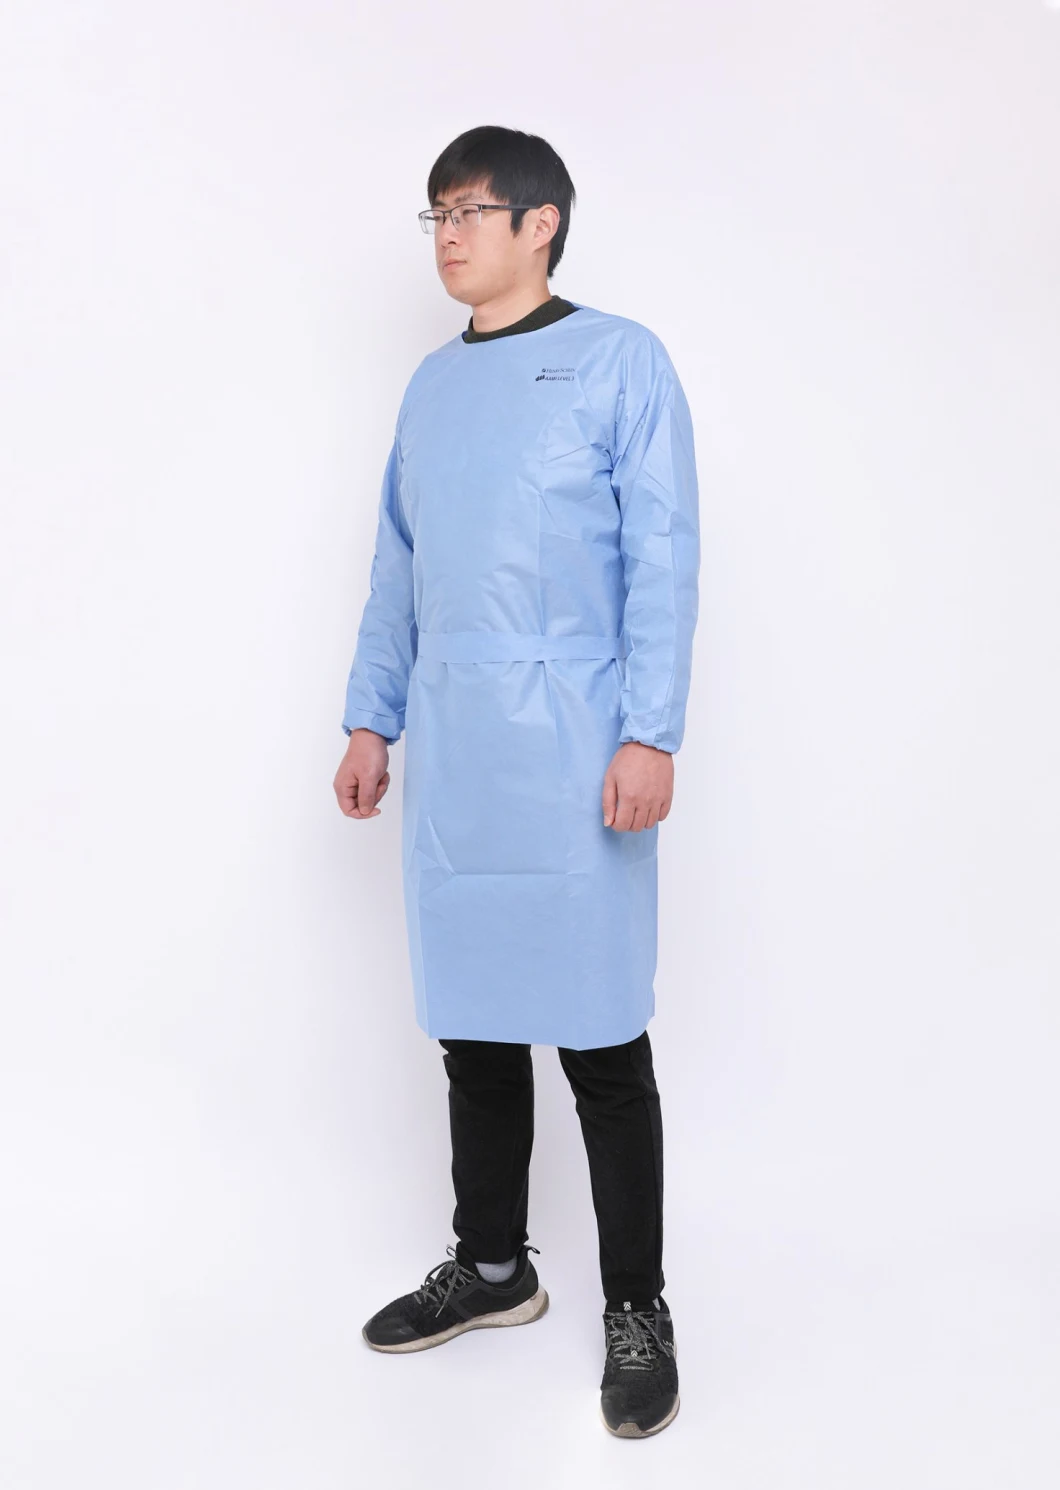 in Stock Microporous Medical Protective Clothing Sterile/Non-Sterile Coverall Scrub Suit Gown Disposable 510K CE